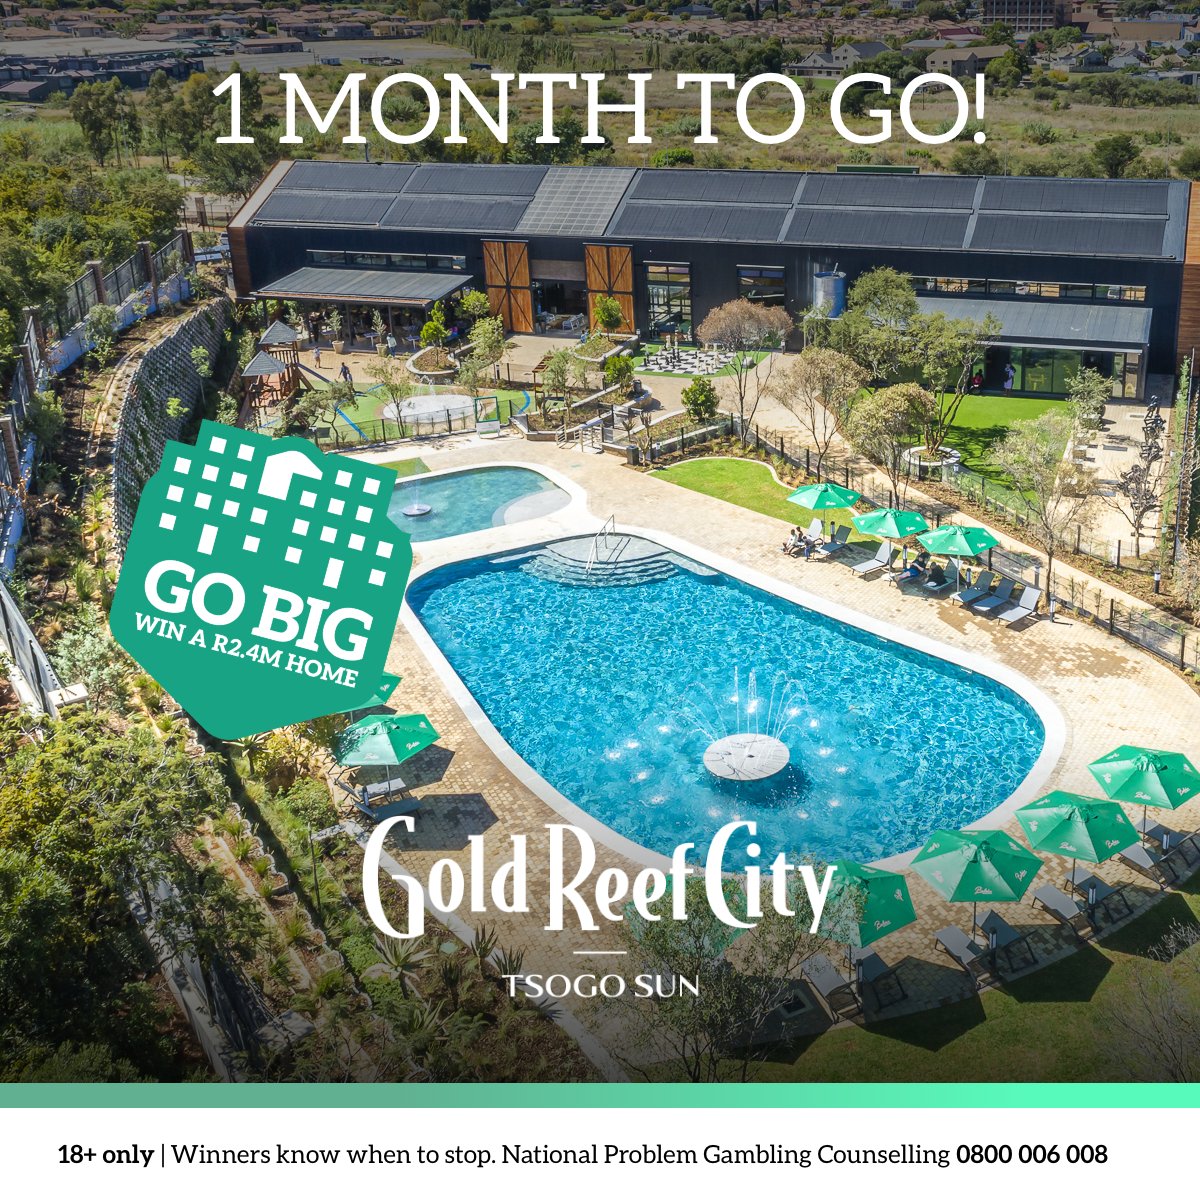 Have you entered the Go Big promotion yet? You could WIN a share of R4.4 million including a R2.4 million home at the Eco-Thaba Village! Spend R300 or more at participating outlets for your chance to win BIG. Learn more: bit.ly/3tgCRB0